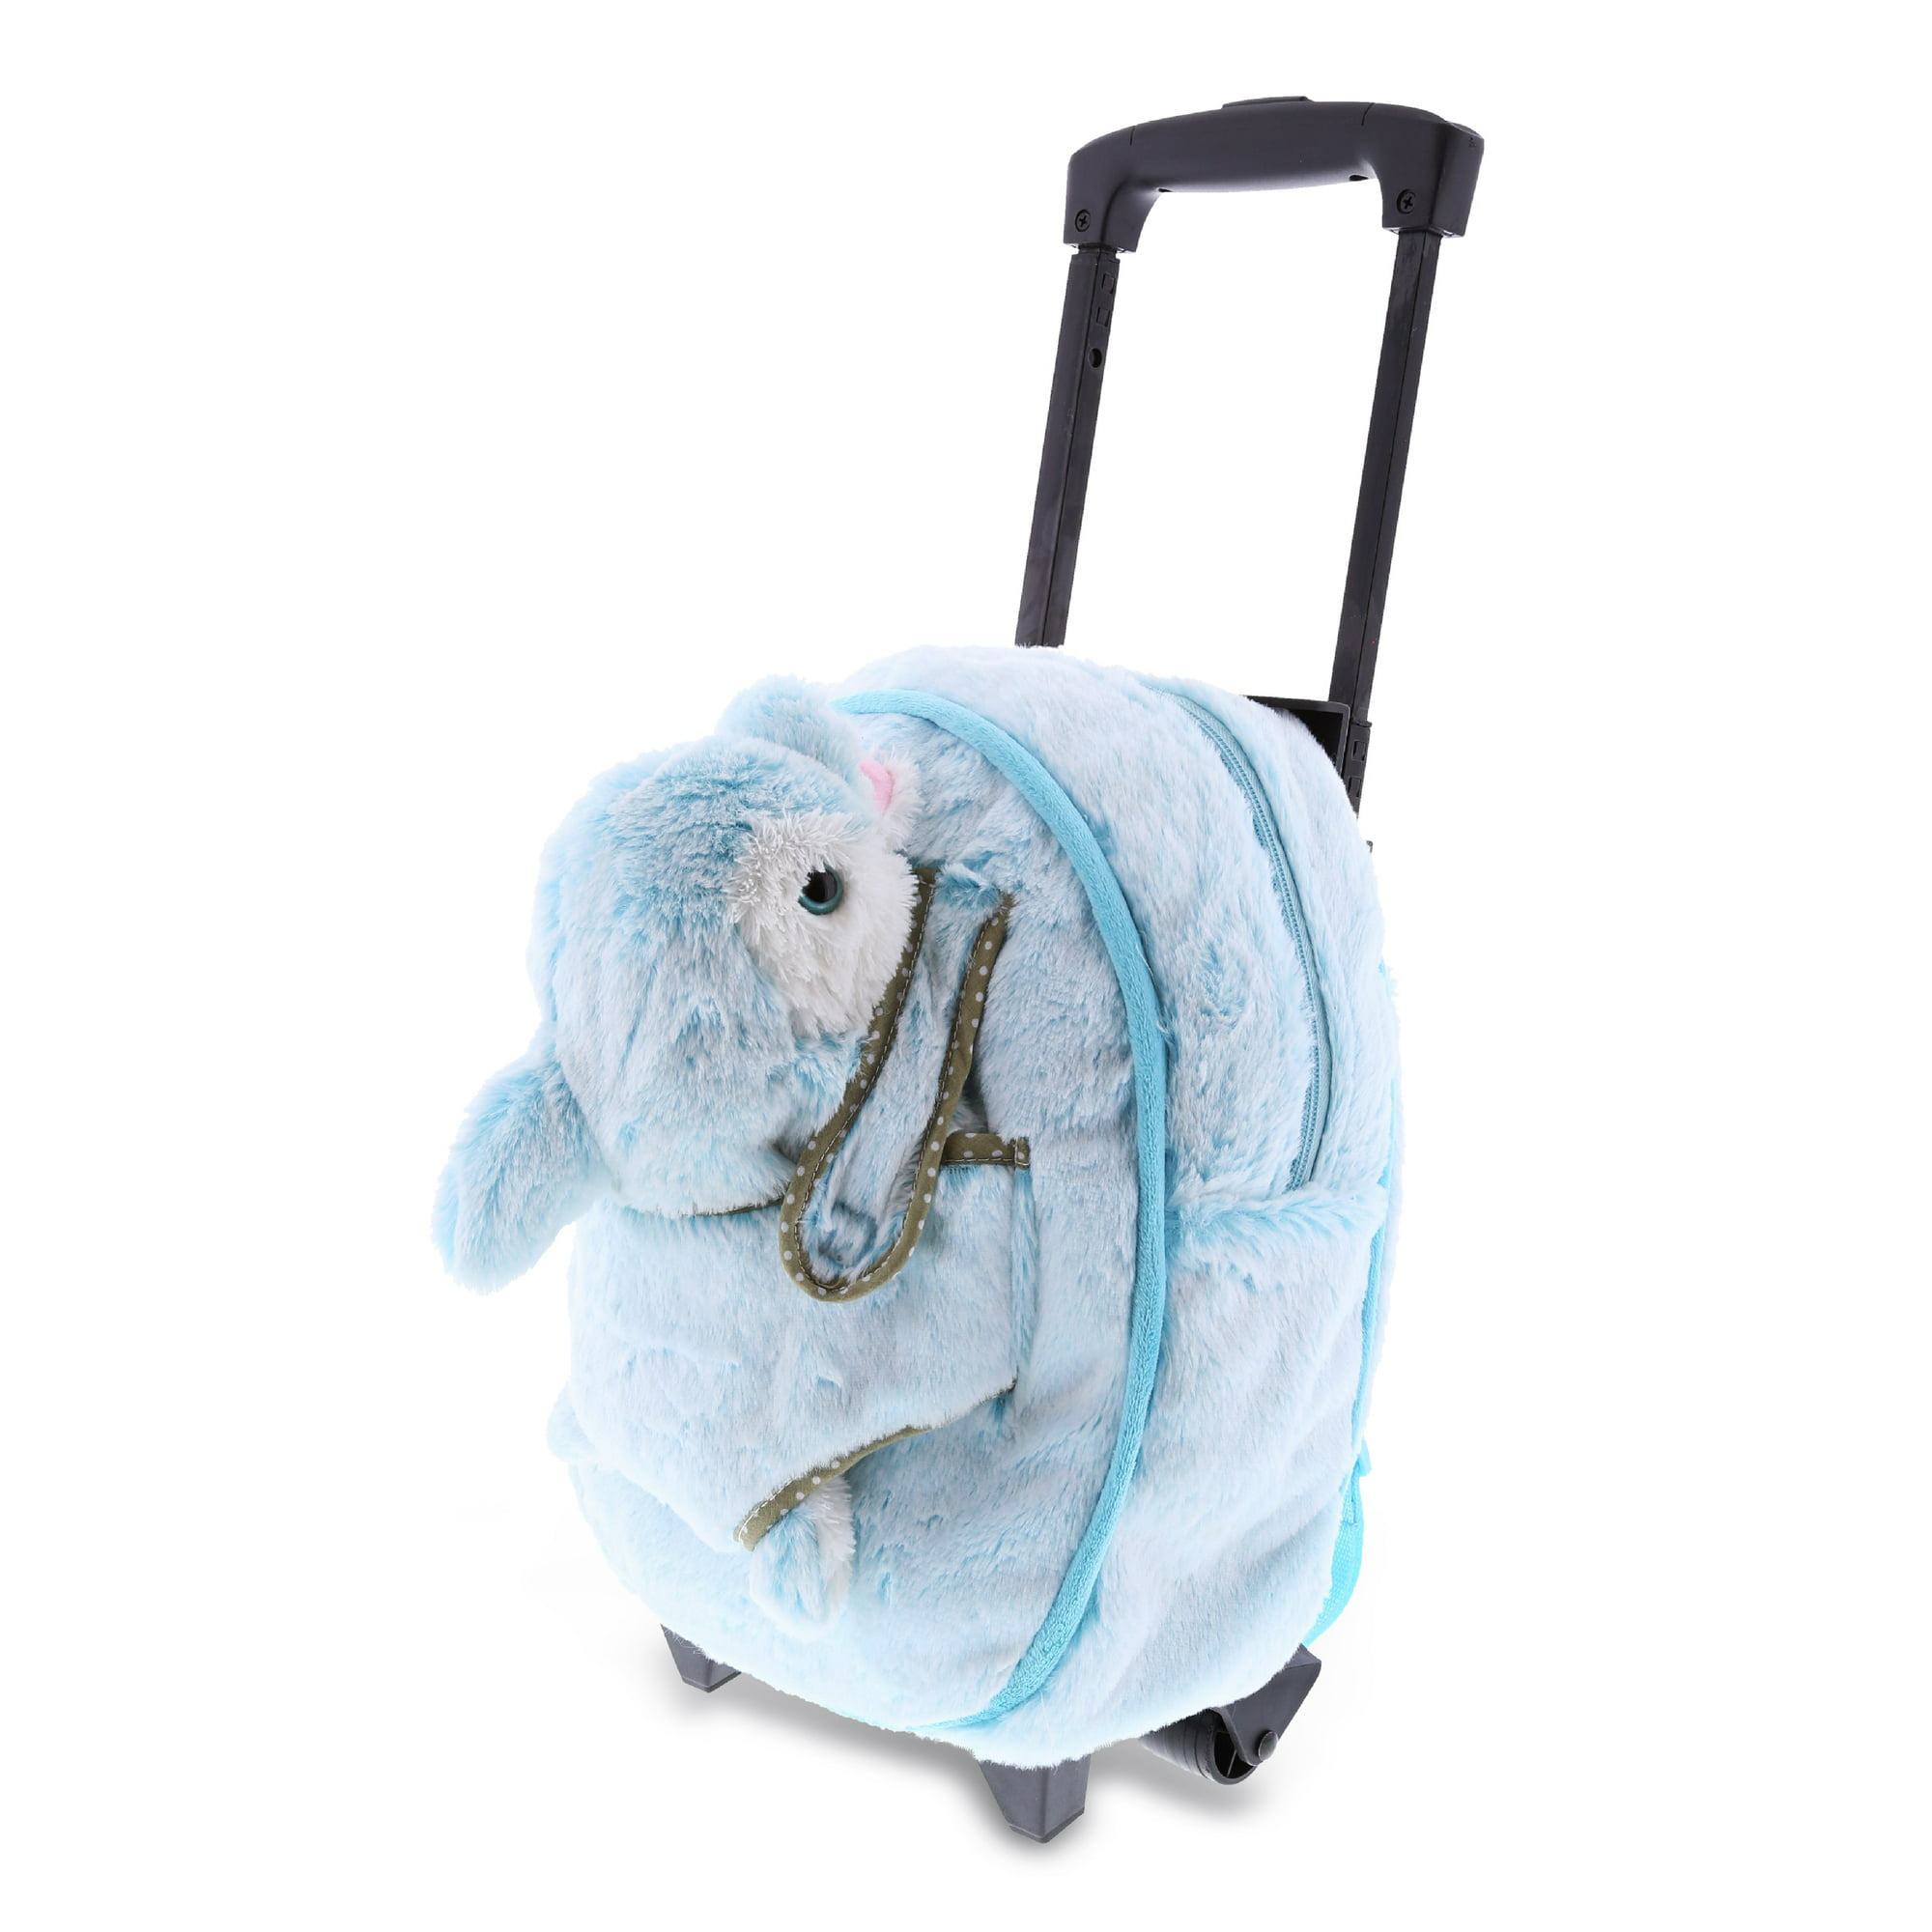 DolliBu Dolphin Plush Trolley & Purse Set - 3-in-1 Kids Trolley, Backpack,  & Blue Dolphin Purse, Soft Plush Backpack on Wheels, School Rolling Bag,  Travel Luggage with Removable Plush Toy Purse 